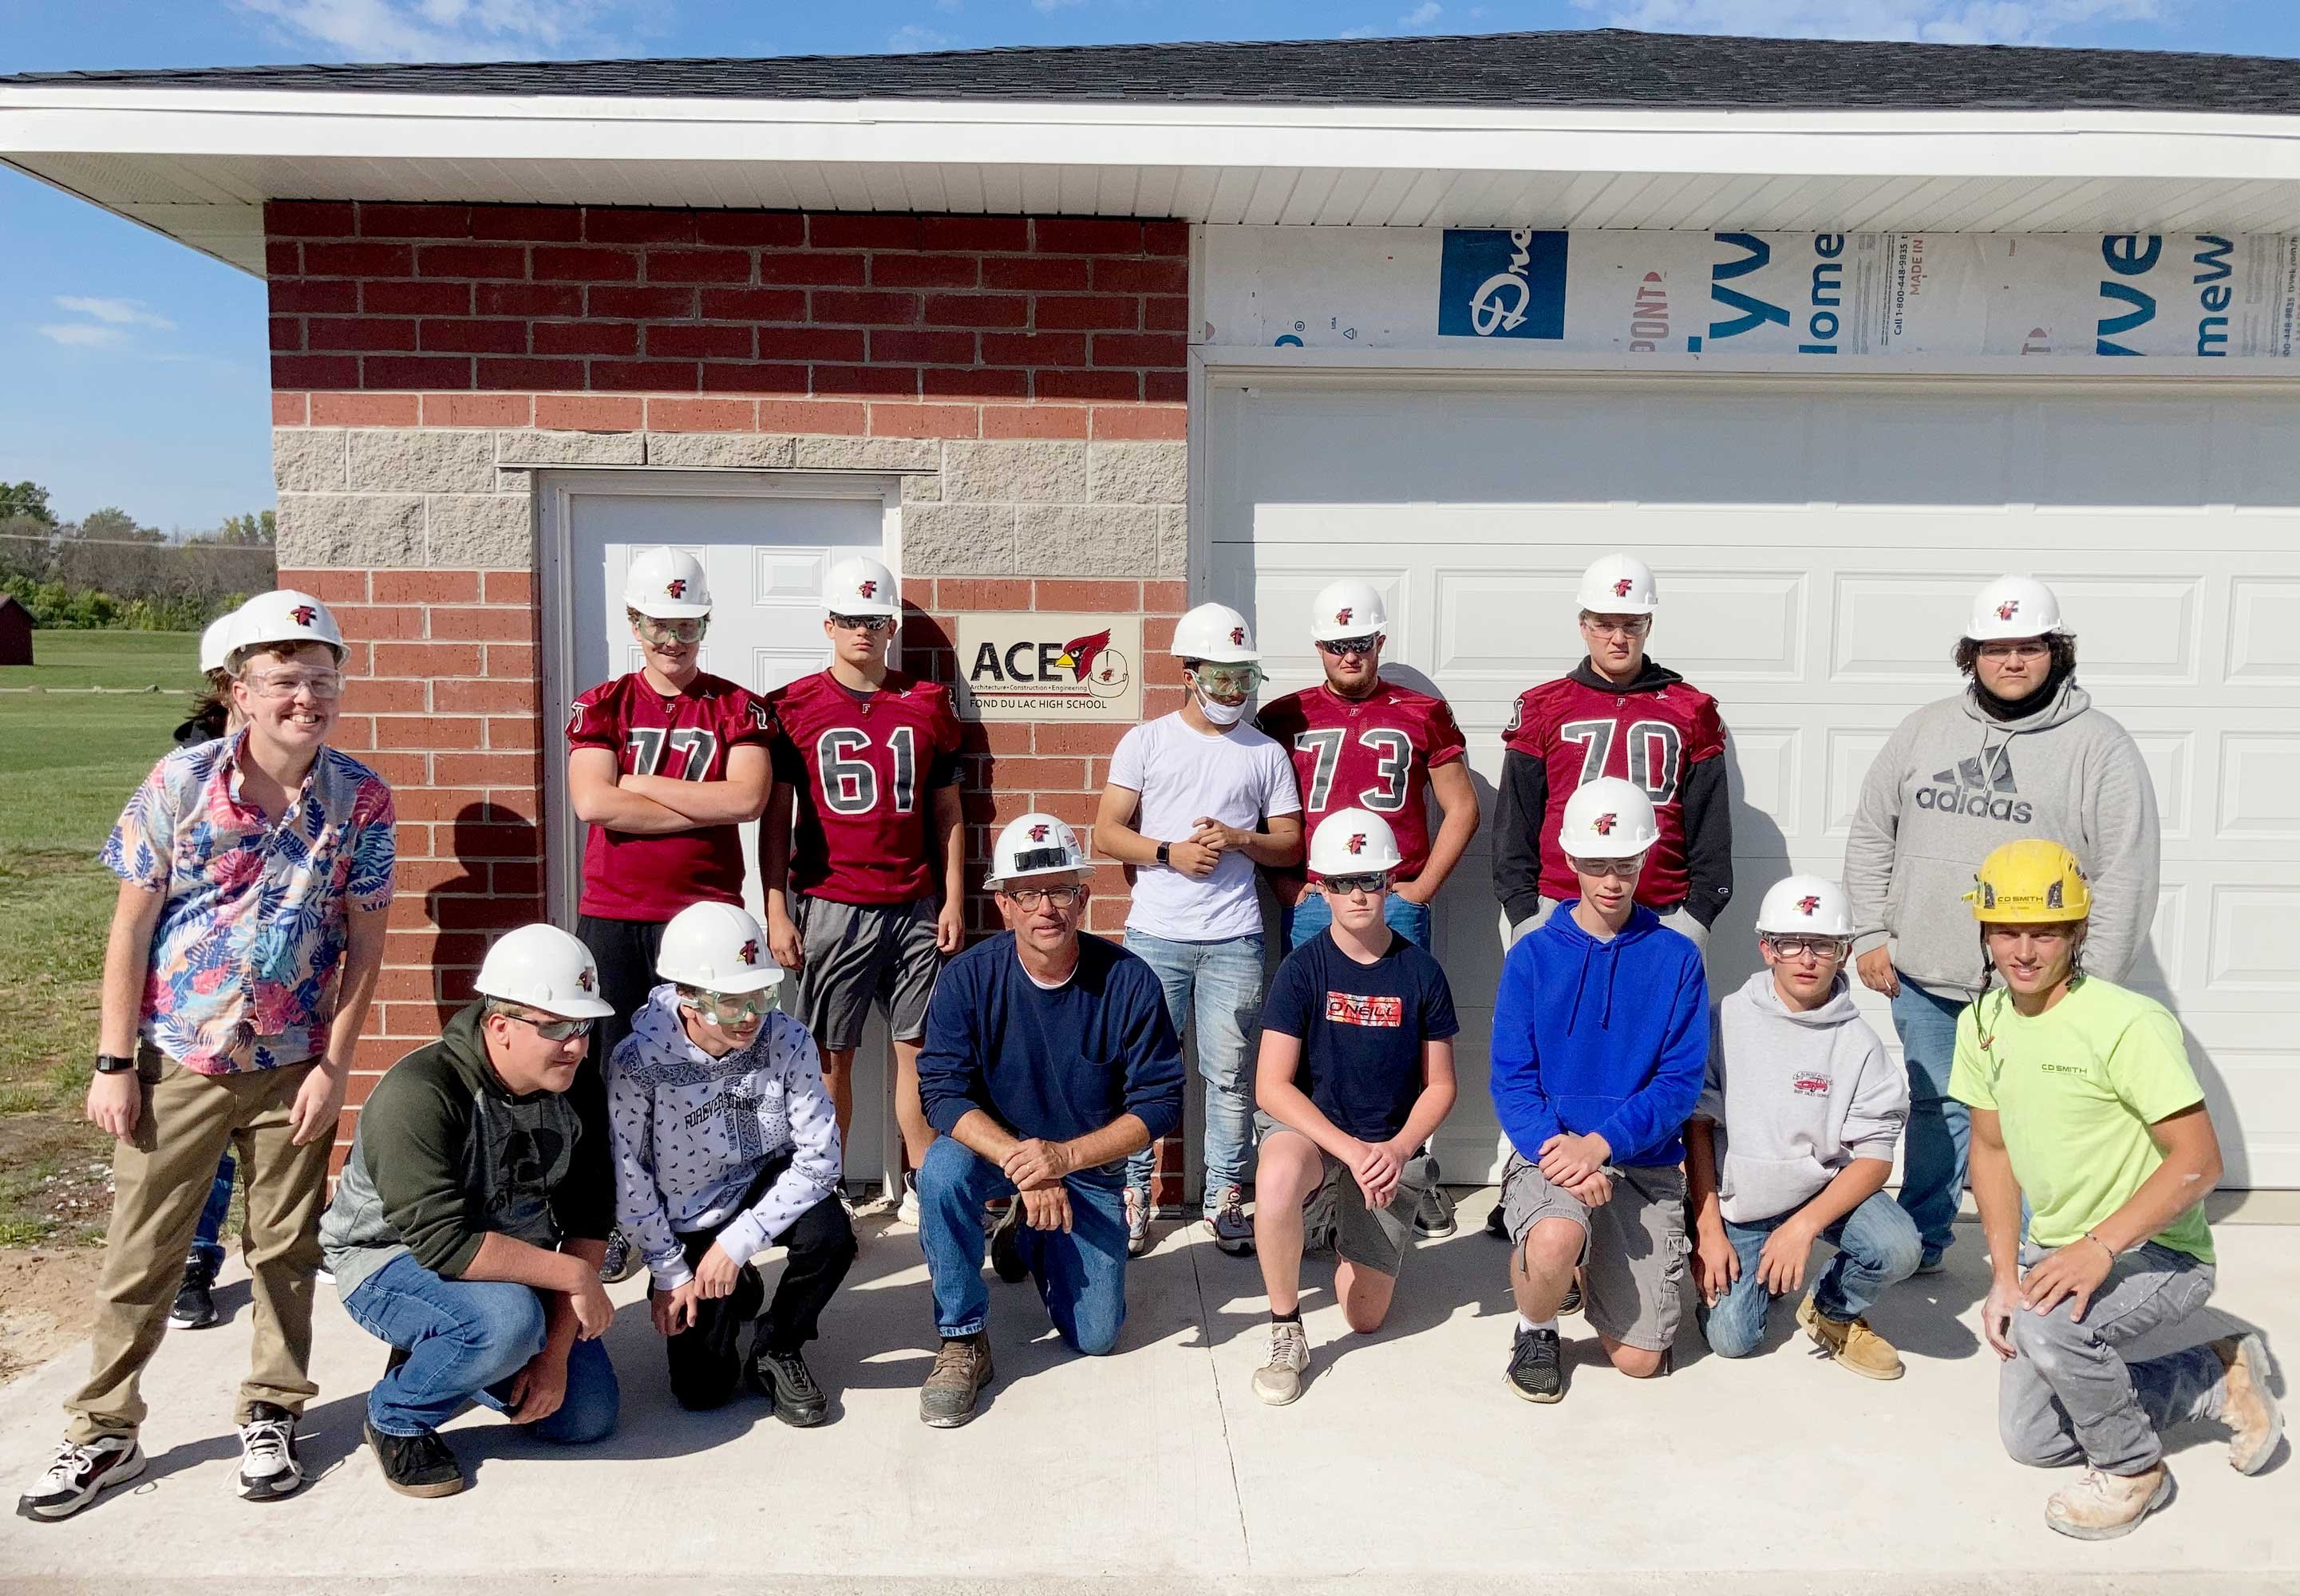 C.D. Smith Construction Building School Partnerships for Construction and Skilled Trades Career Fond du Lac ACE Masonry Week